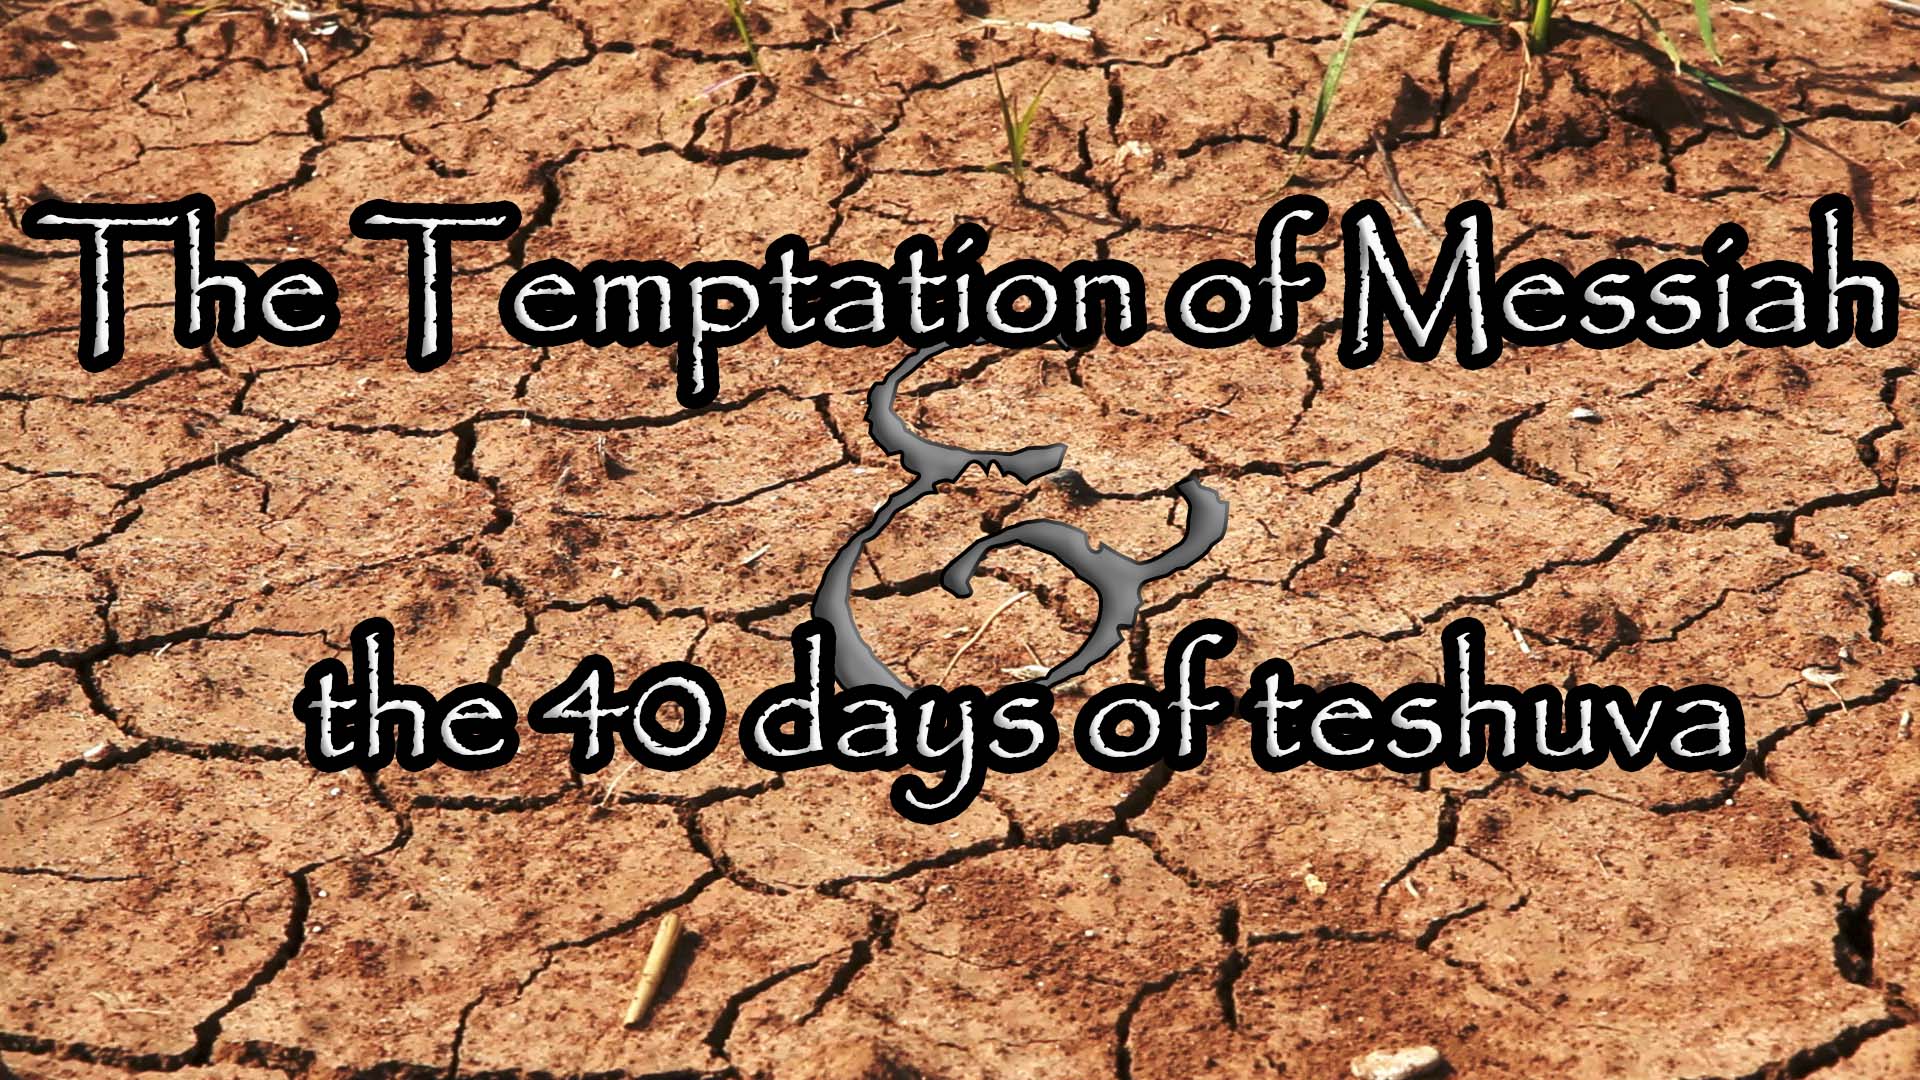 the-forty-days-of-teshuva-and-the-temptation-of-messiah-the-ancient